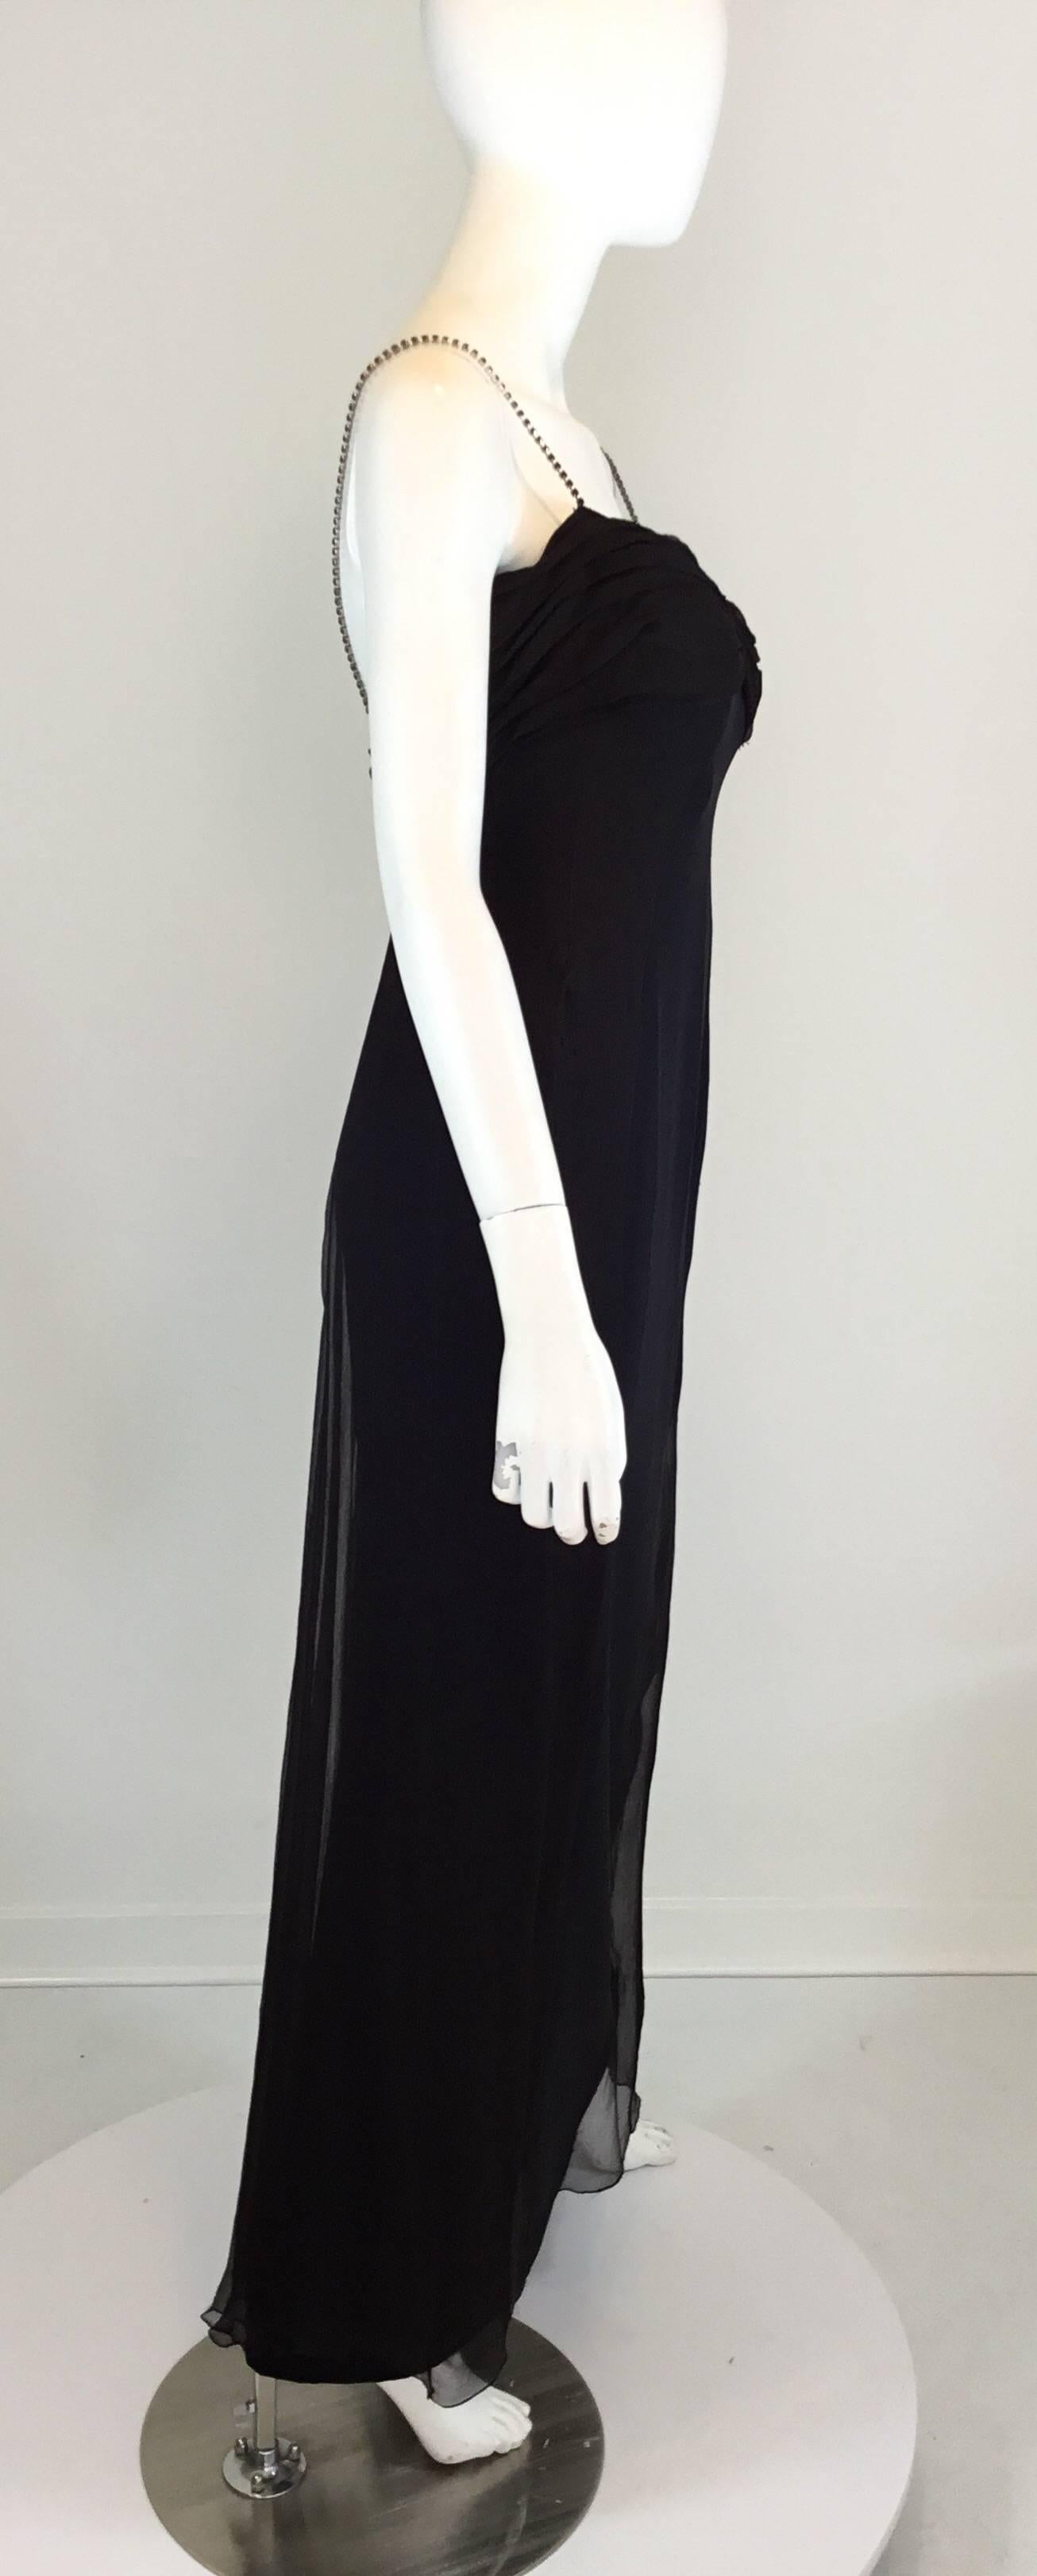 Vintage 1970's Lanvin dress features a silk chiffon bust and side panel with rhinestone encrusted shoulder straps, and a back zipper closure. Dress is fully lined, labeled size 42, made in France. 59% acetate and 41% silk. Measurements are as